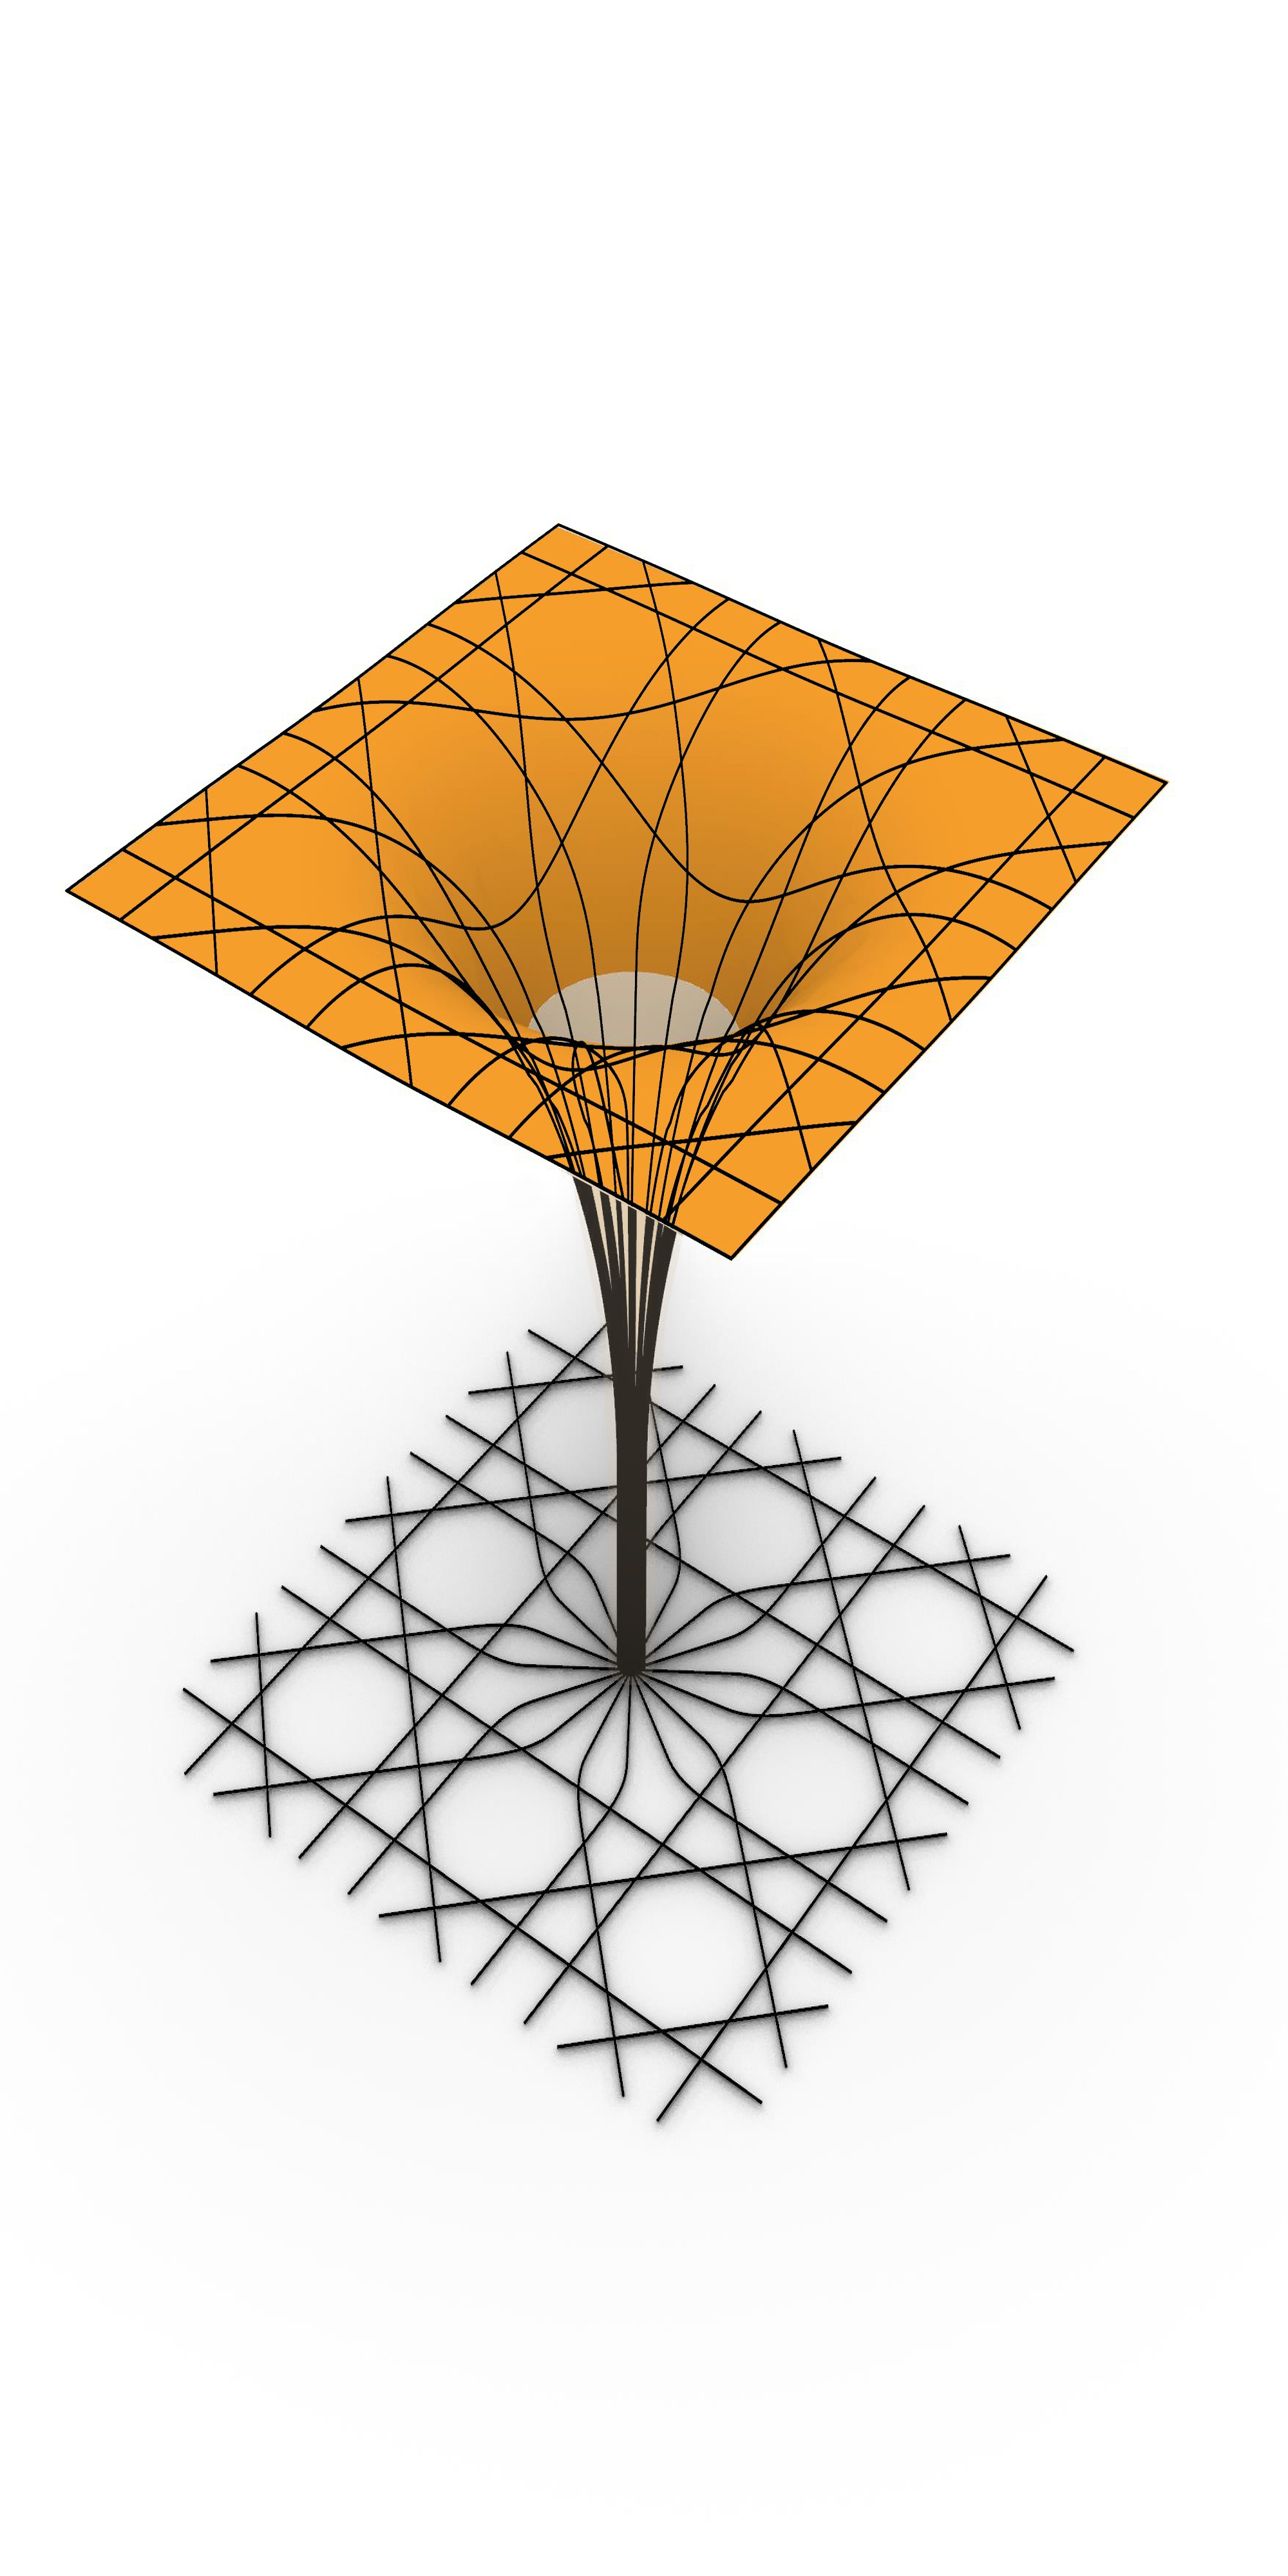 In the parametric model, the axes are projected onto the space